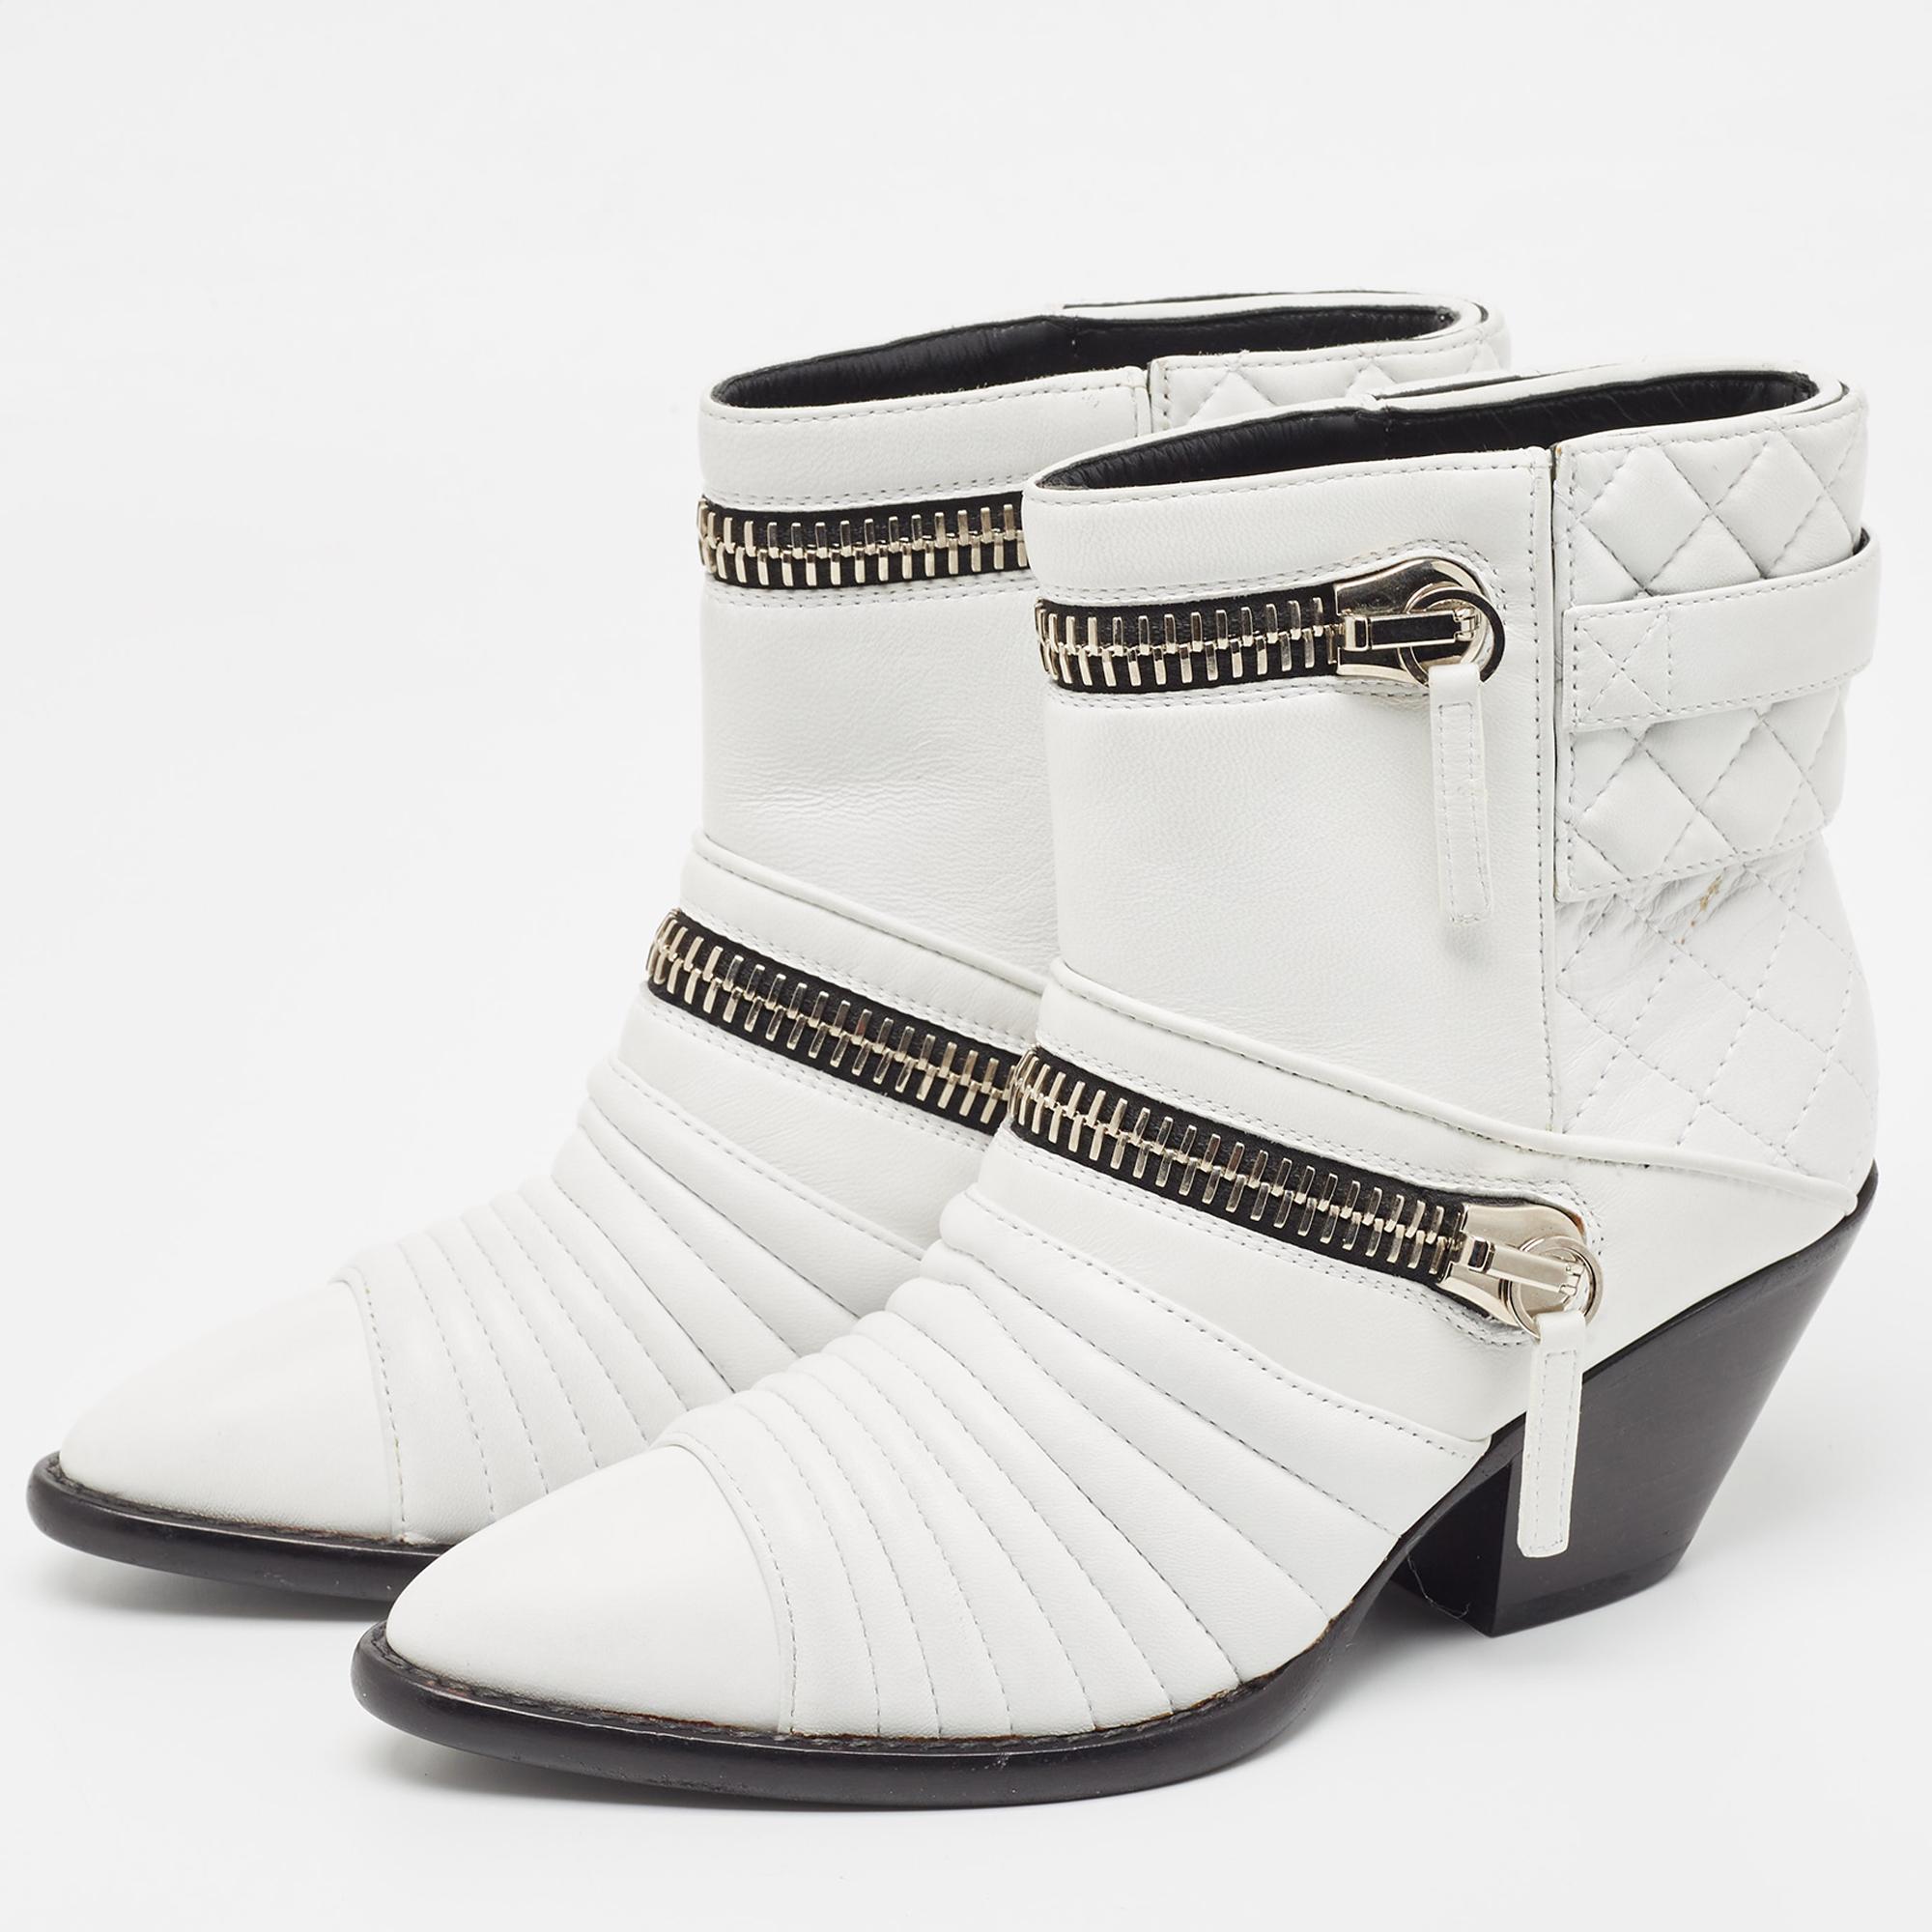 Perfectly sewn and finished to ensure an elegant look and fit, these white ankle boots are a purchase you'll love flaunting. They look great on the feet.

Includes: Original Box